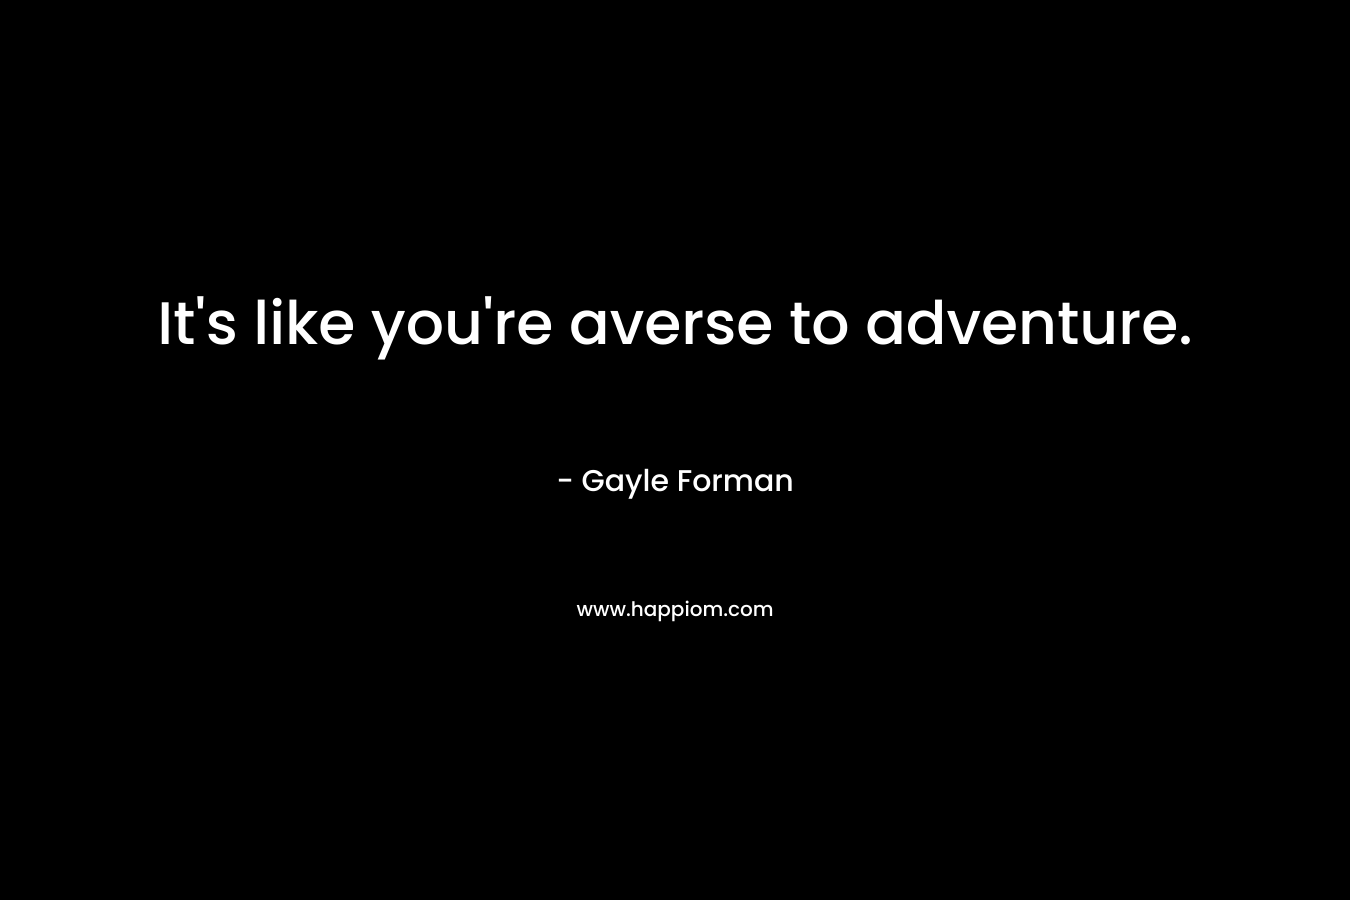 It’s like you’re averse to adventure. – Gayle Forman